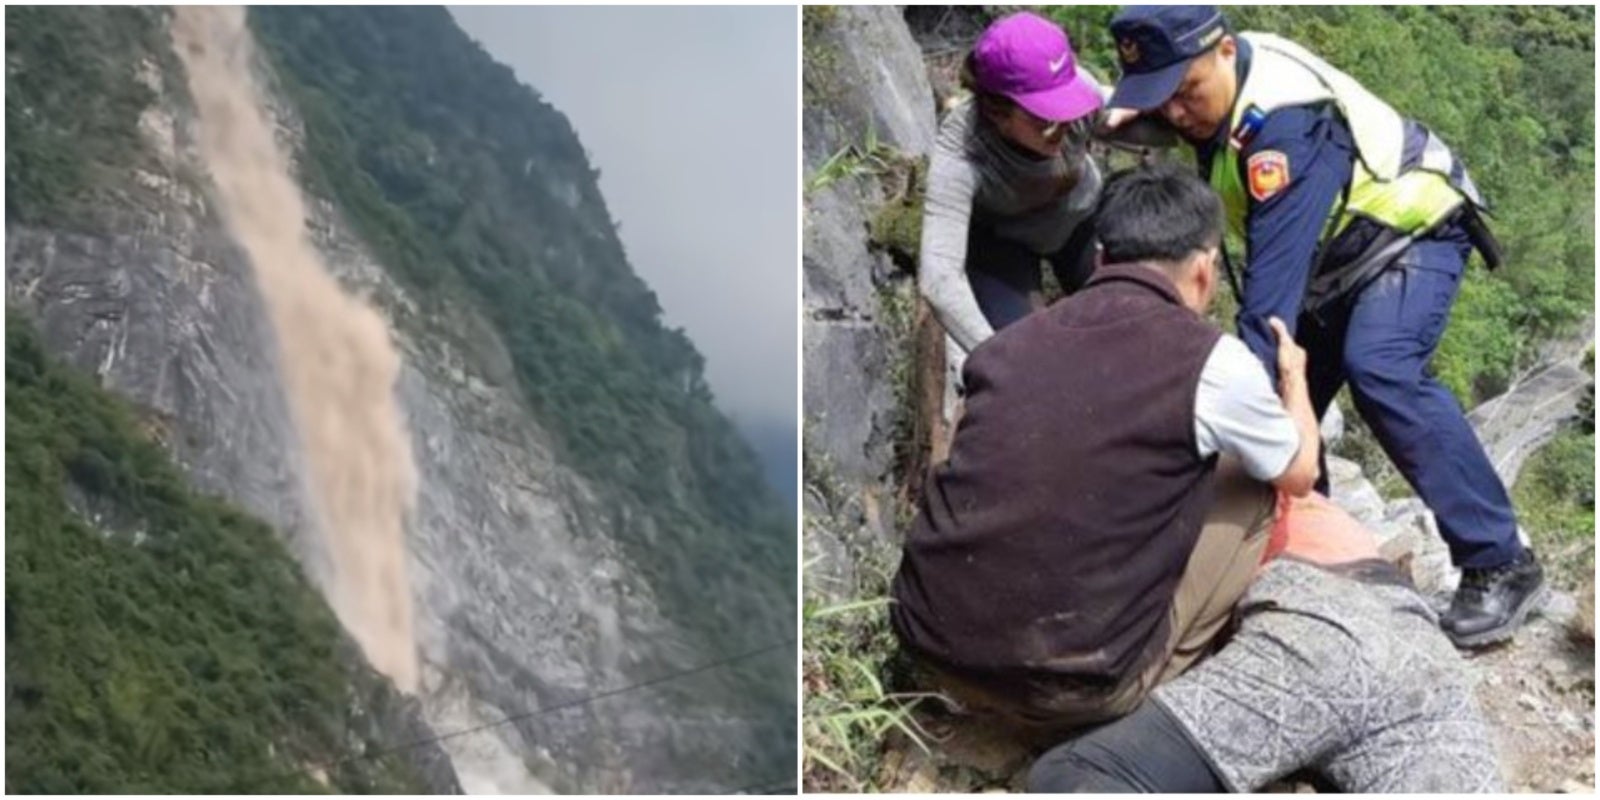 2 Malaysians Severely Injured by Falling Rocks in Taiwan Magnitude 6.1 Earthquake - WORLD OF BUZZ 1